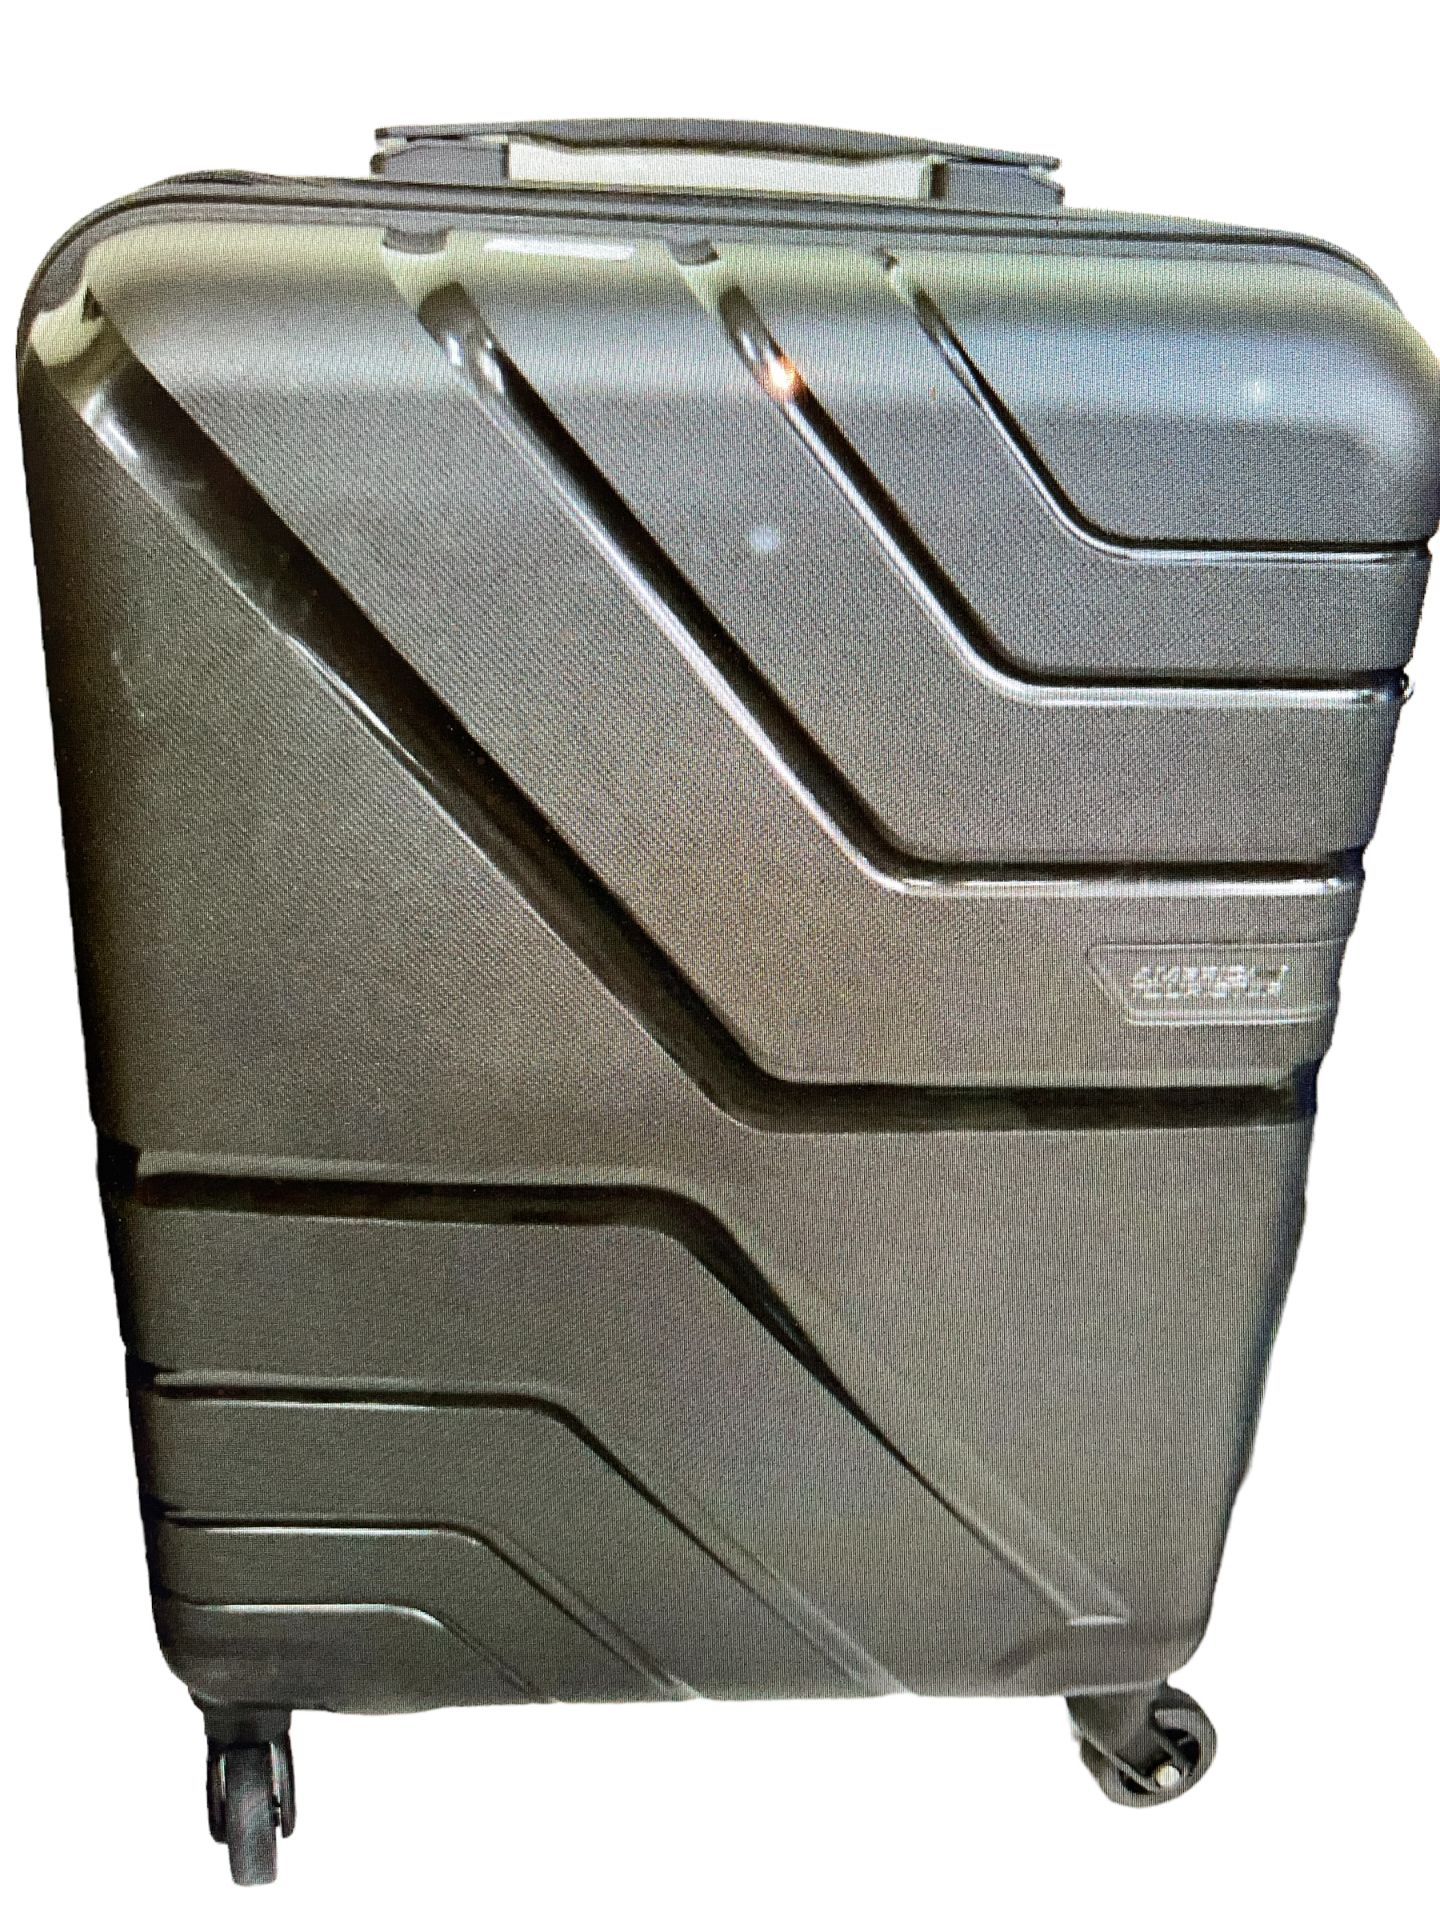 American Tourister Large Hardshell Case, Lost Property from a Private Jet Charter